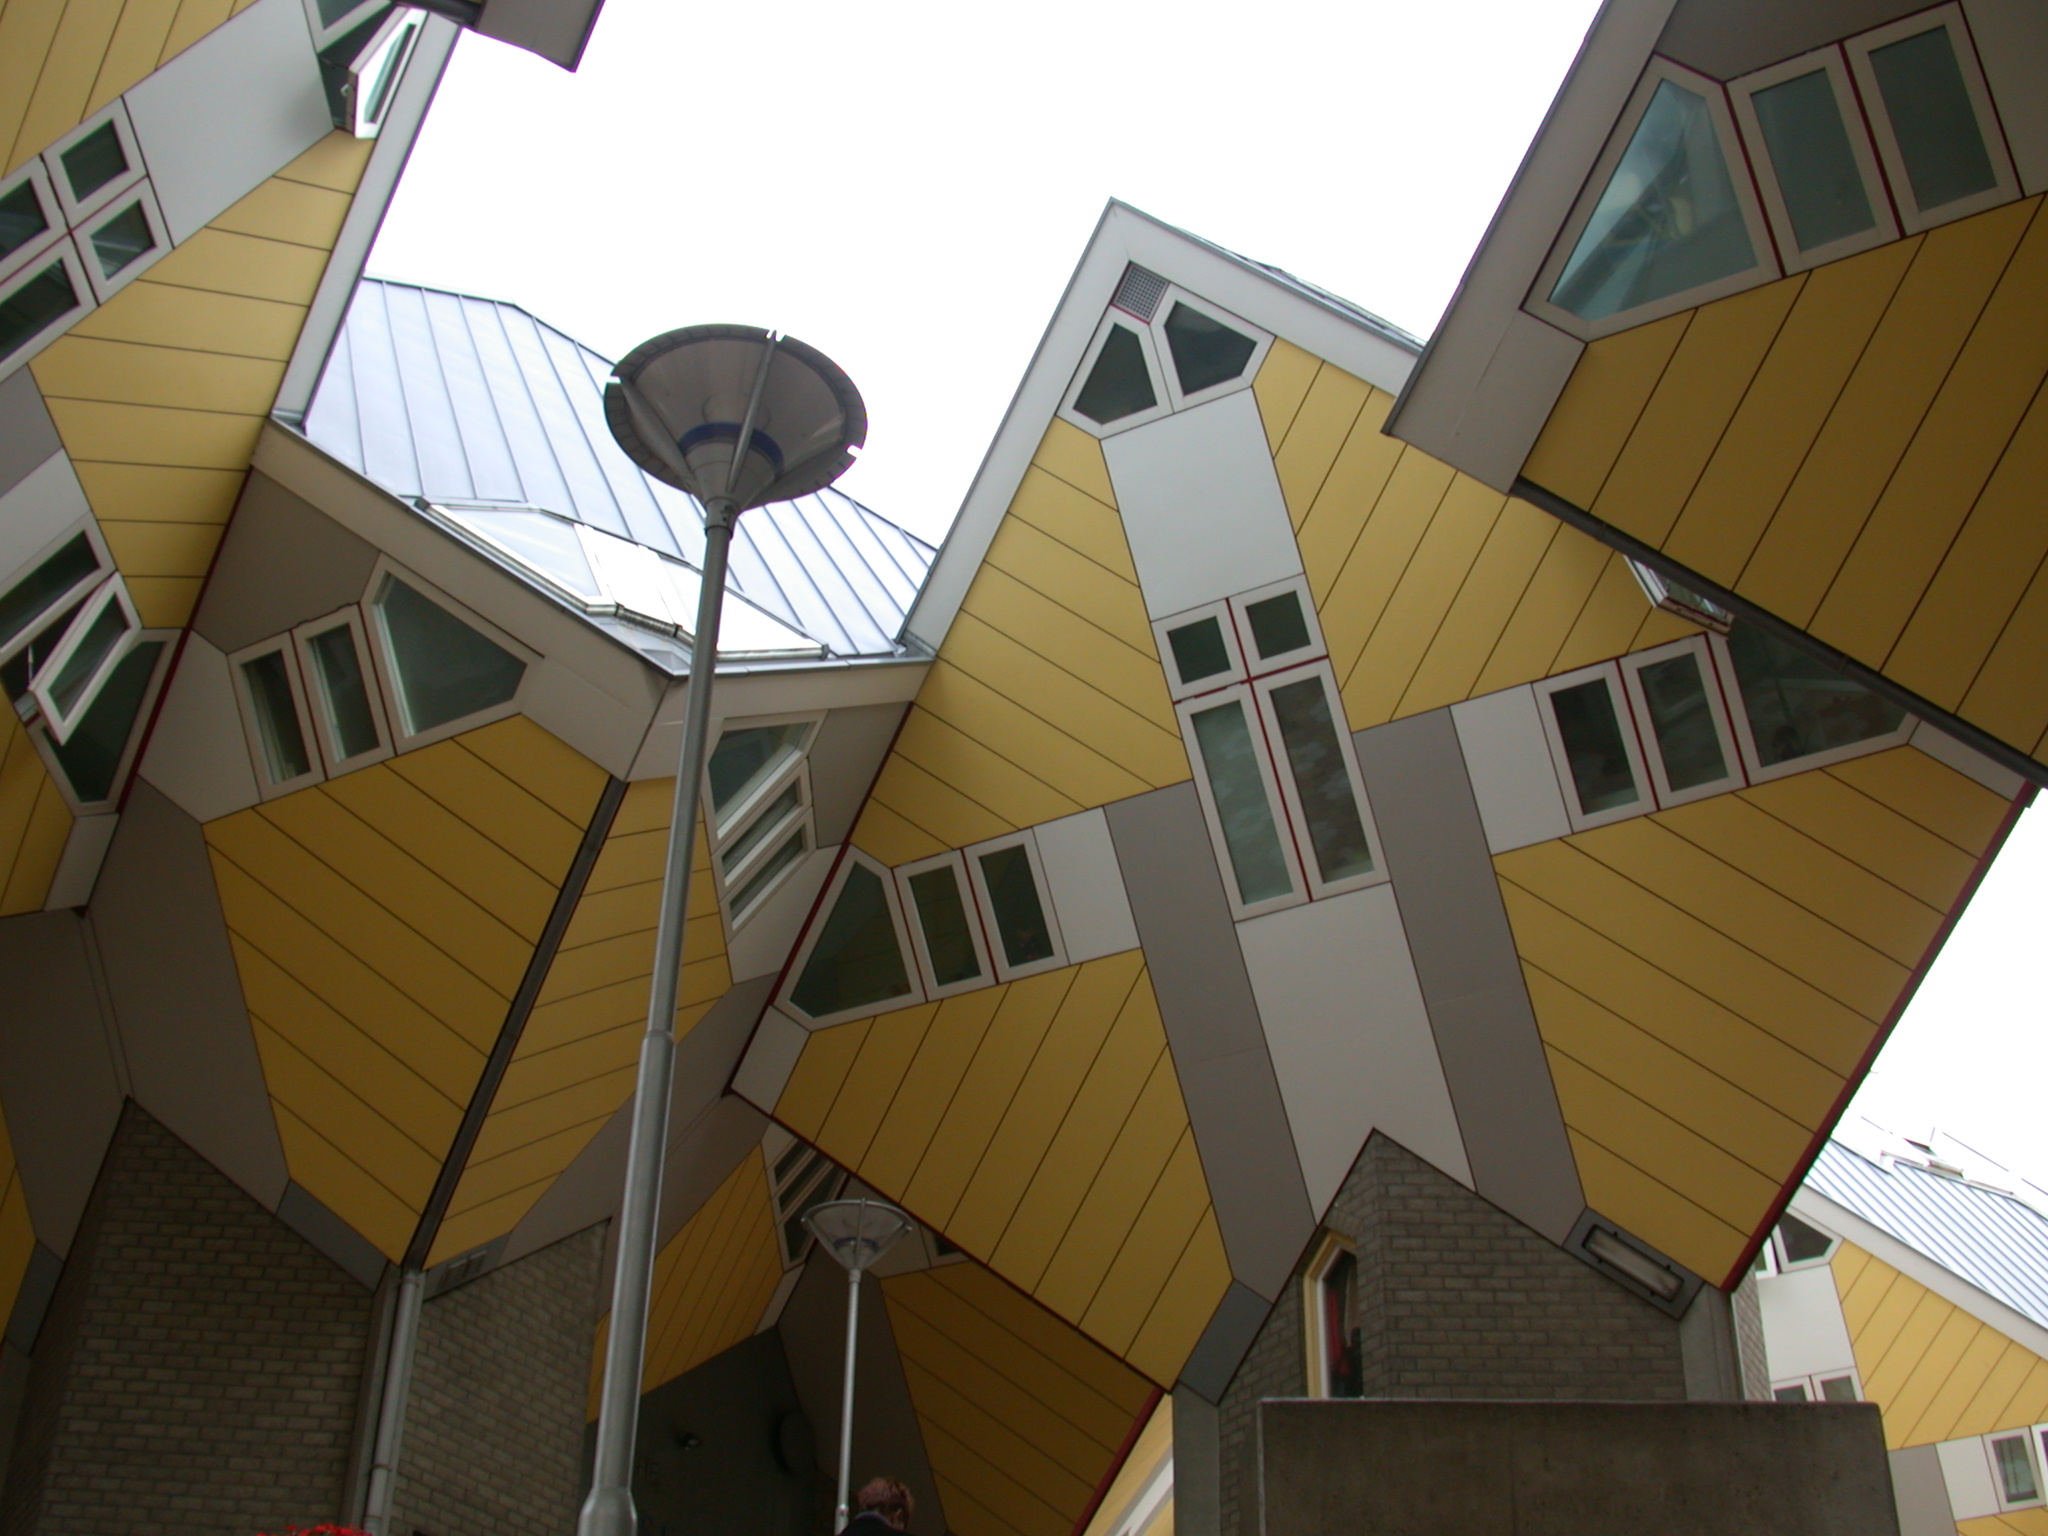 architecture exteriors cubicle cubicles cube cubes lamppost square houses house home rotterdam